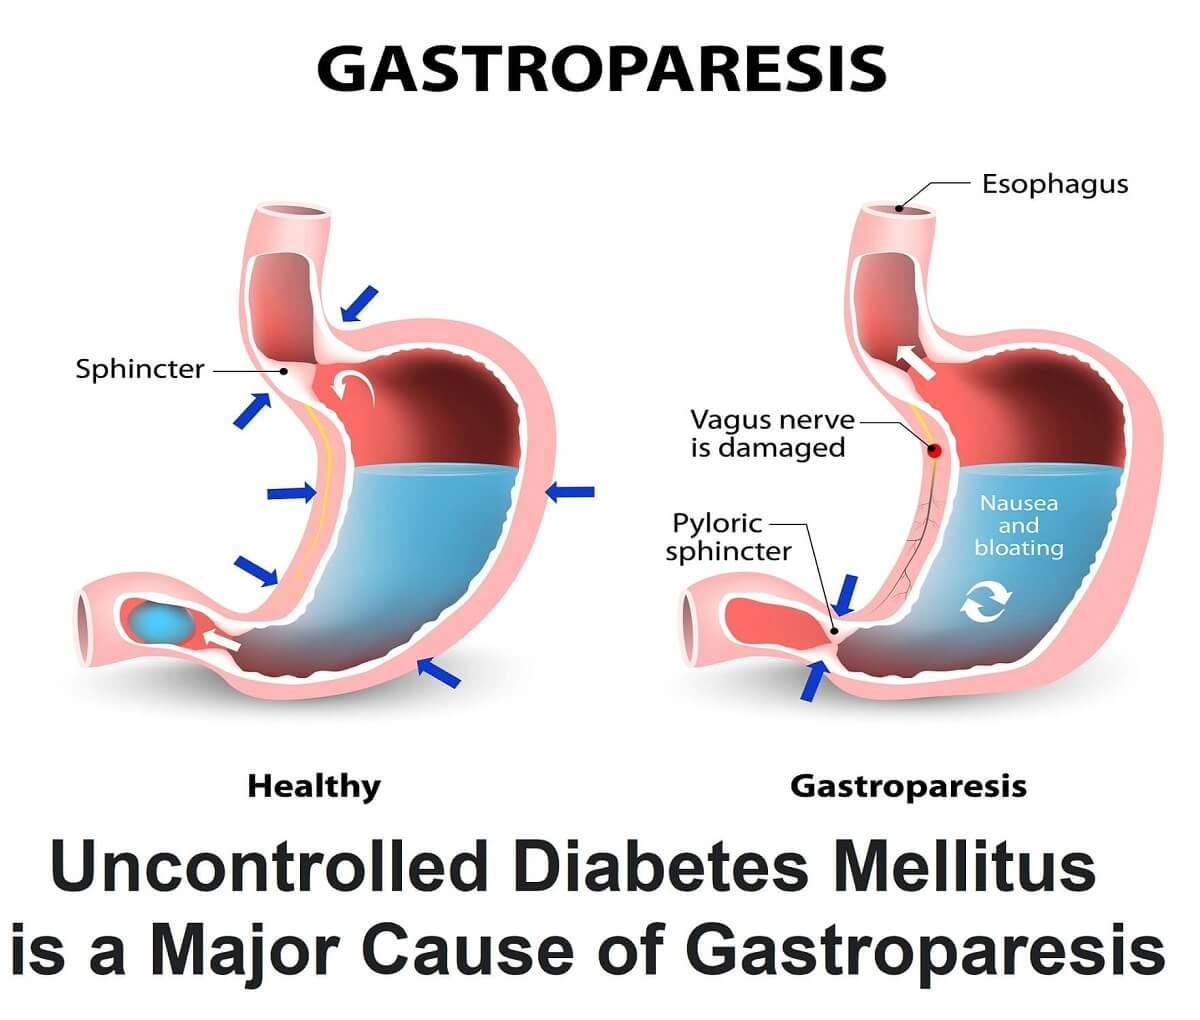 Gastroparesis is mostly caused by peripheral autonomic neuropathy due to uncontrolled diabetes mellitus